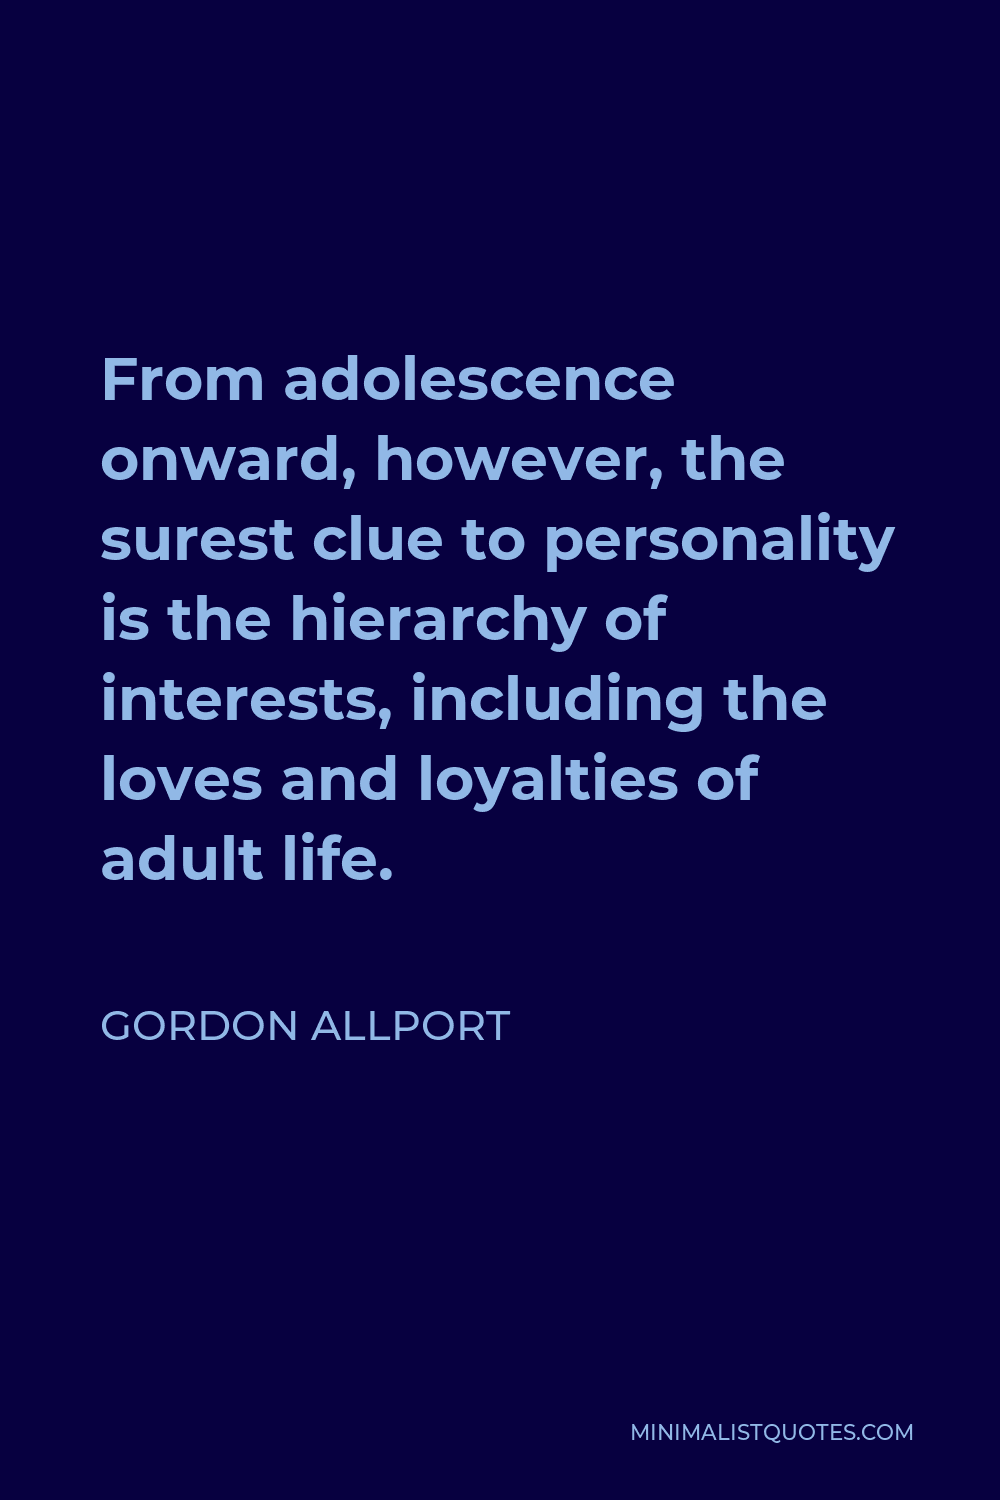 Gordon Allport Quote - From adolescence onward, however, the surest clue to personality is the hierarchy of interests, including the loves and loyalties of adult life.